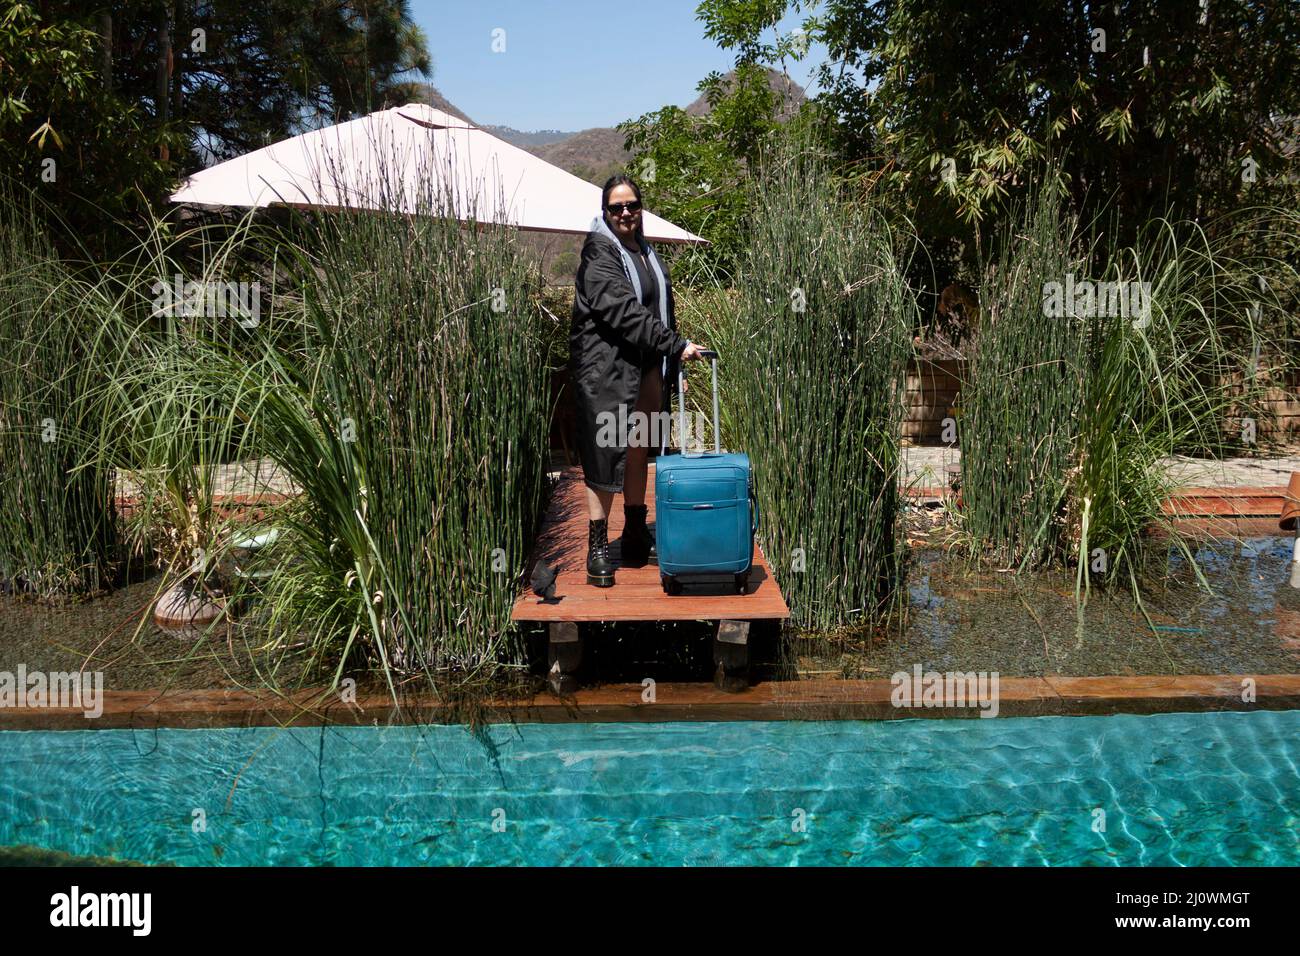 Caucasian Mexican woman dressed in a bathing suit, cape, boots and sunglasses arriving at a natural outdoor pool directing a wheeled suitcase over a w Stock Photo